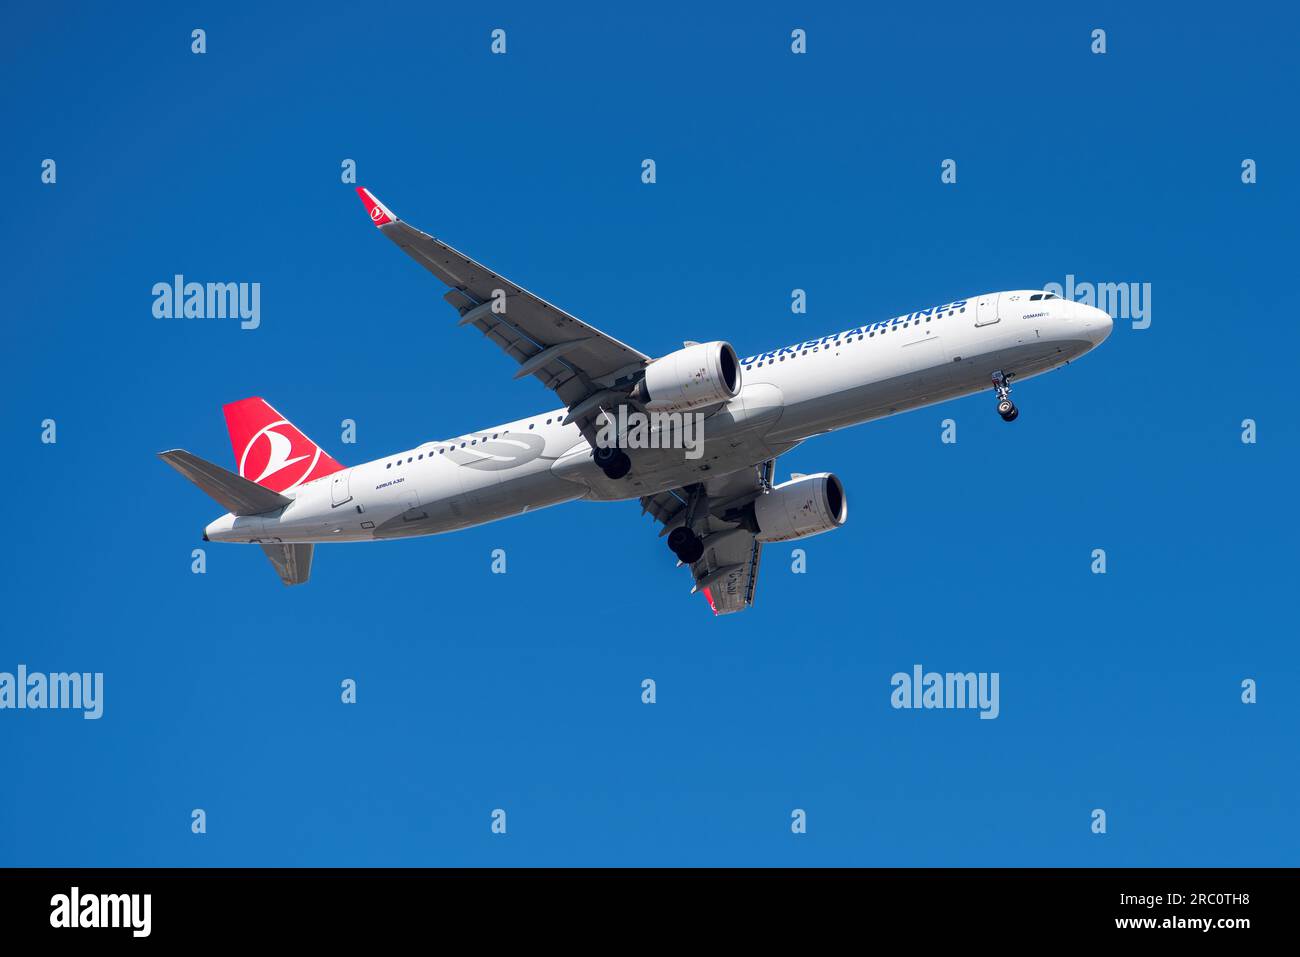 Lisbon, Portugal - July 12, 2023: Turkish Airlines with aircraft Airbus A321 approaching to land at Lisbon International Airport against blue sky Stock Photo